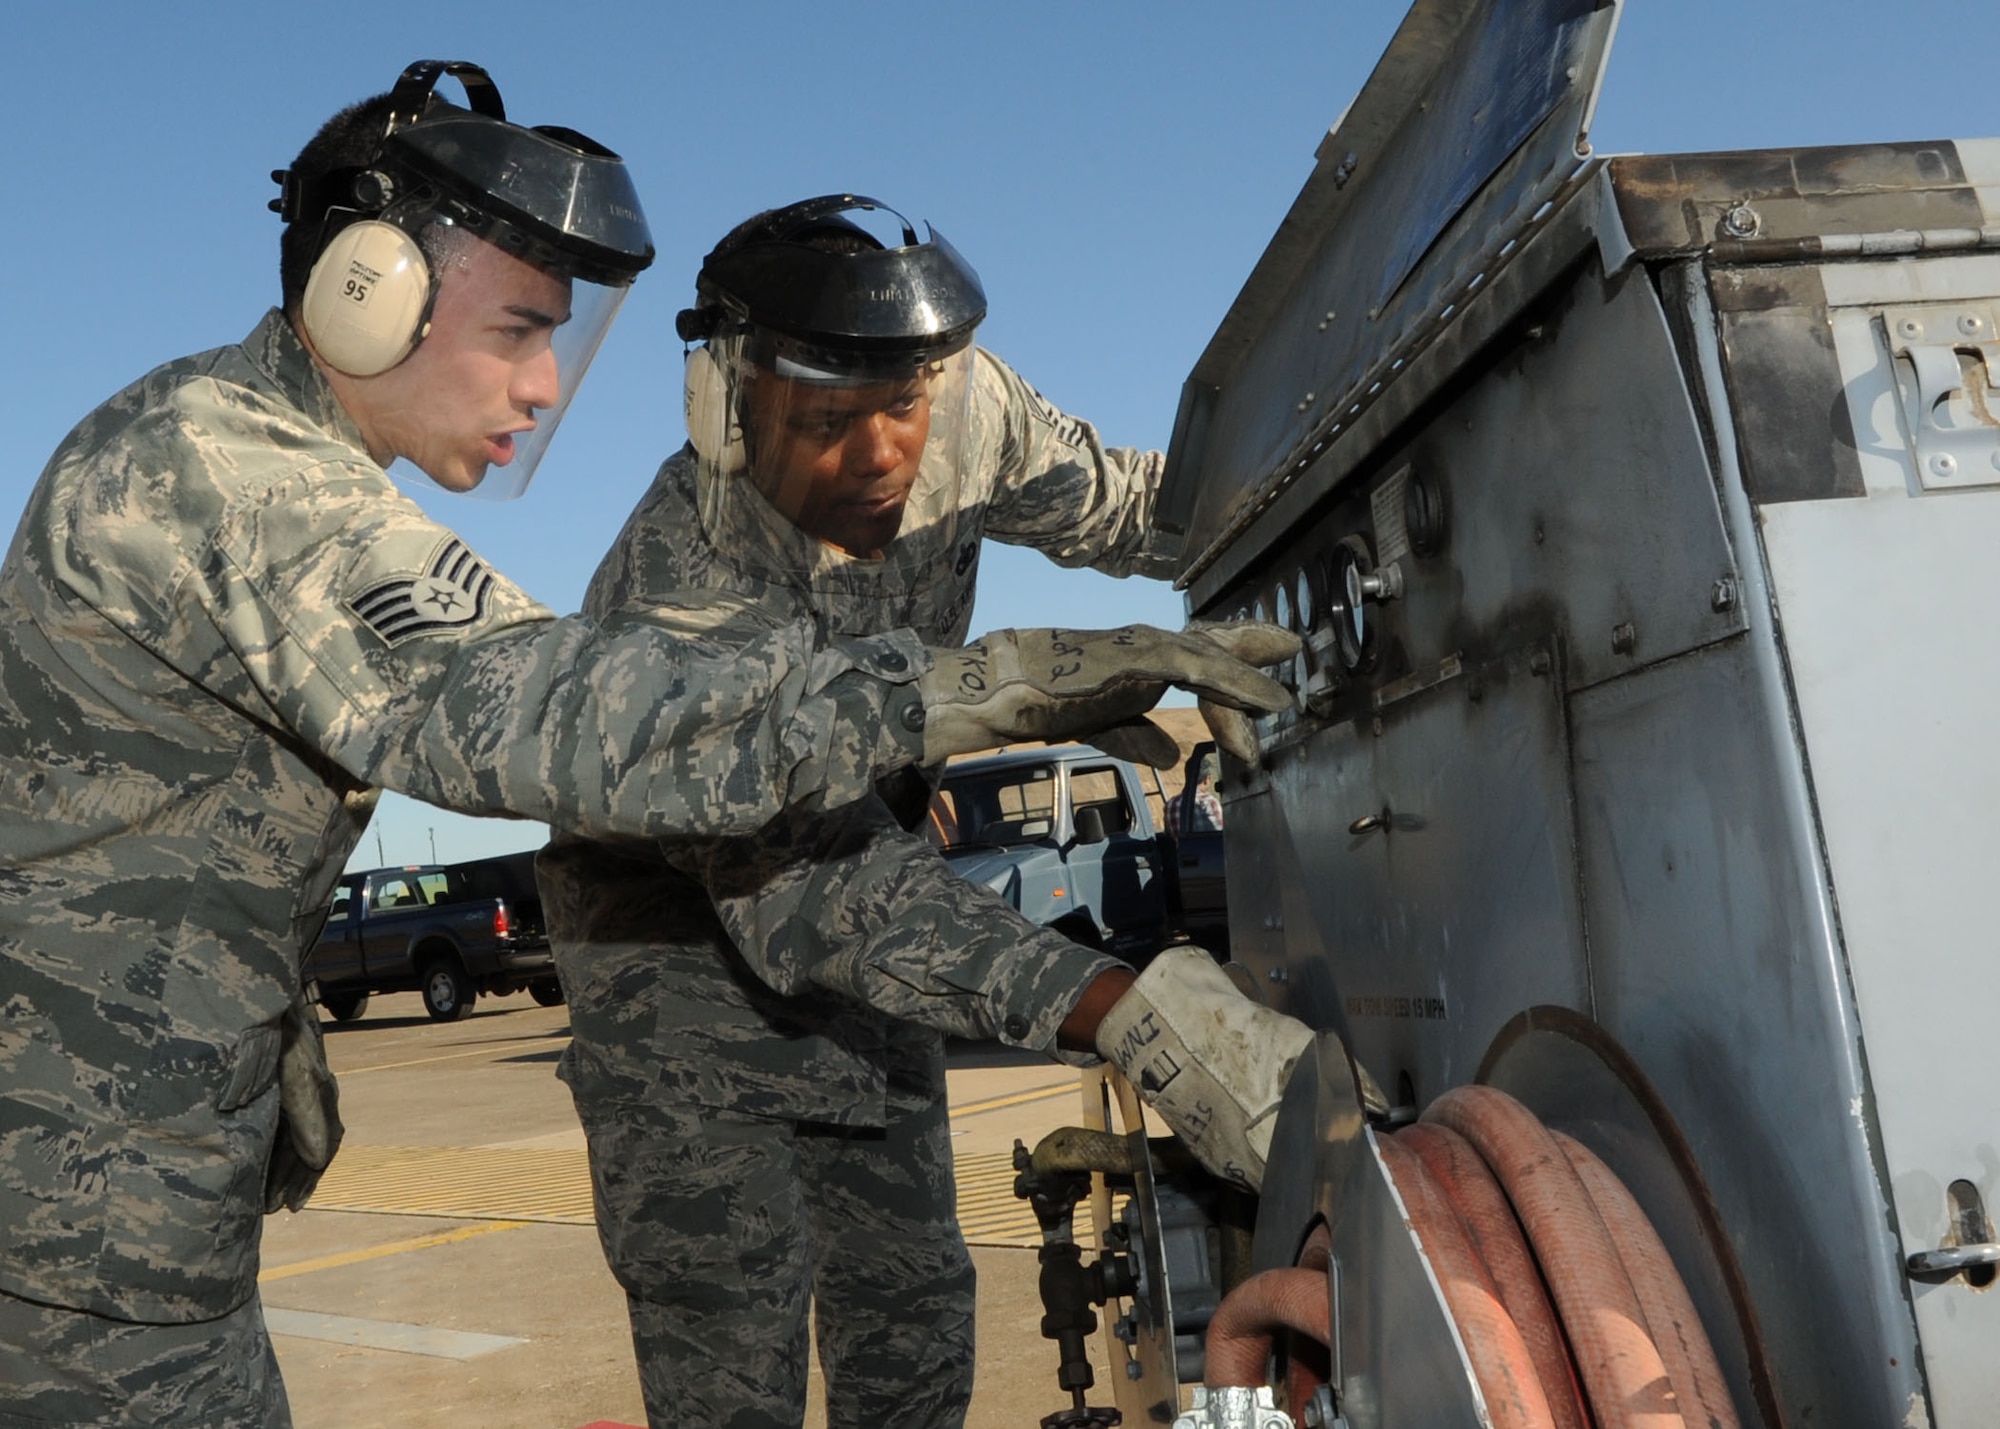 Staff Sgt. Jesus Casillas, 39th Maintenance Squadron, Crash Disabled Damaged Aircraft Recovery team member, discusses the process of inflating a pneumatic airbag with Chief Master Sgt. Anthony Johnson, 39th ABW command chief, Jan. 23, 2014, here.  Airmen with the CDDAR team demonstrated the squadrons Crash Disabled Damaged Aircraft Repair capability. (U.S. Air Force photo by Staff Sgt. Veronica Pierce/Released) 